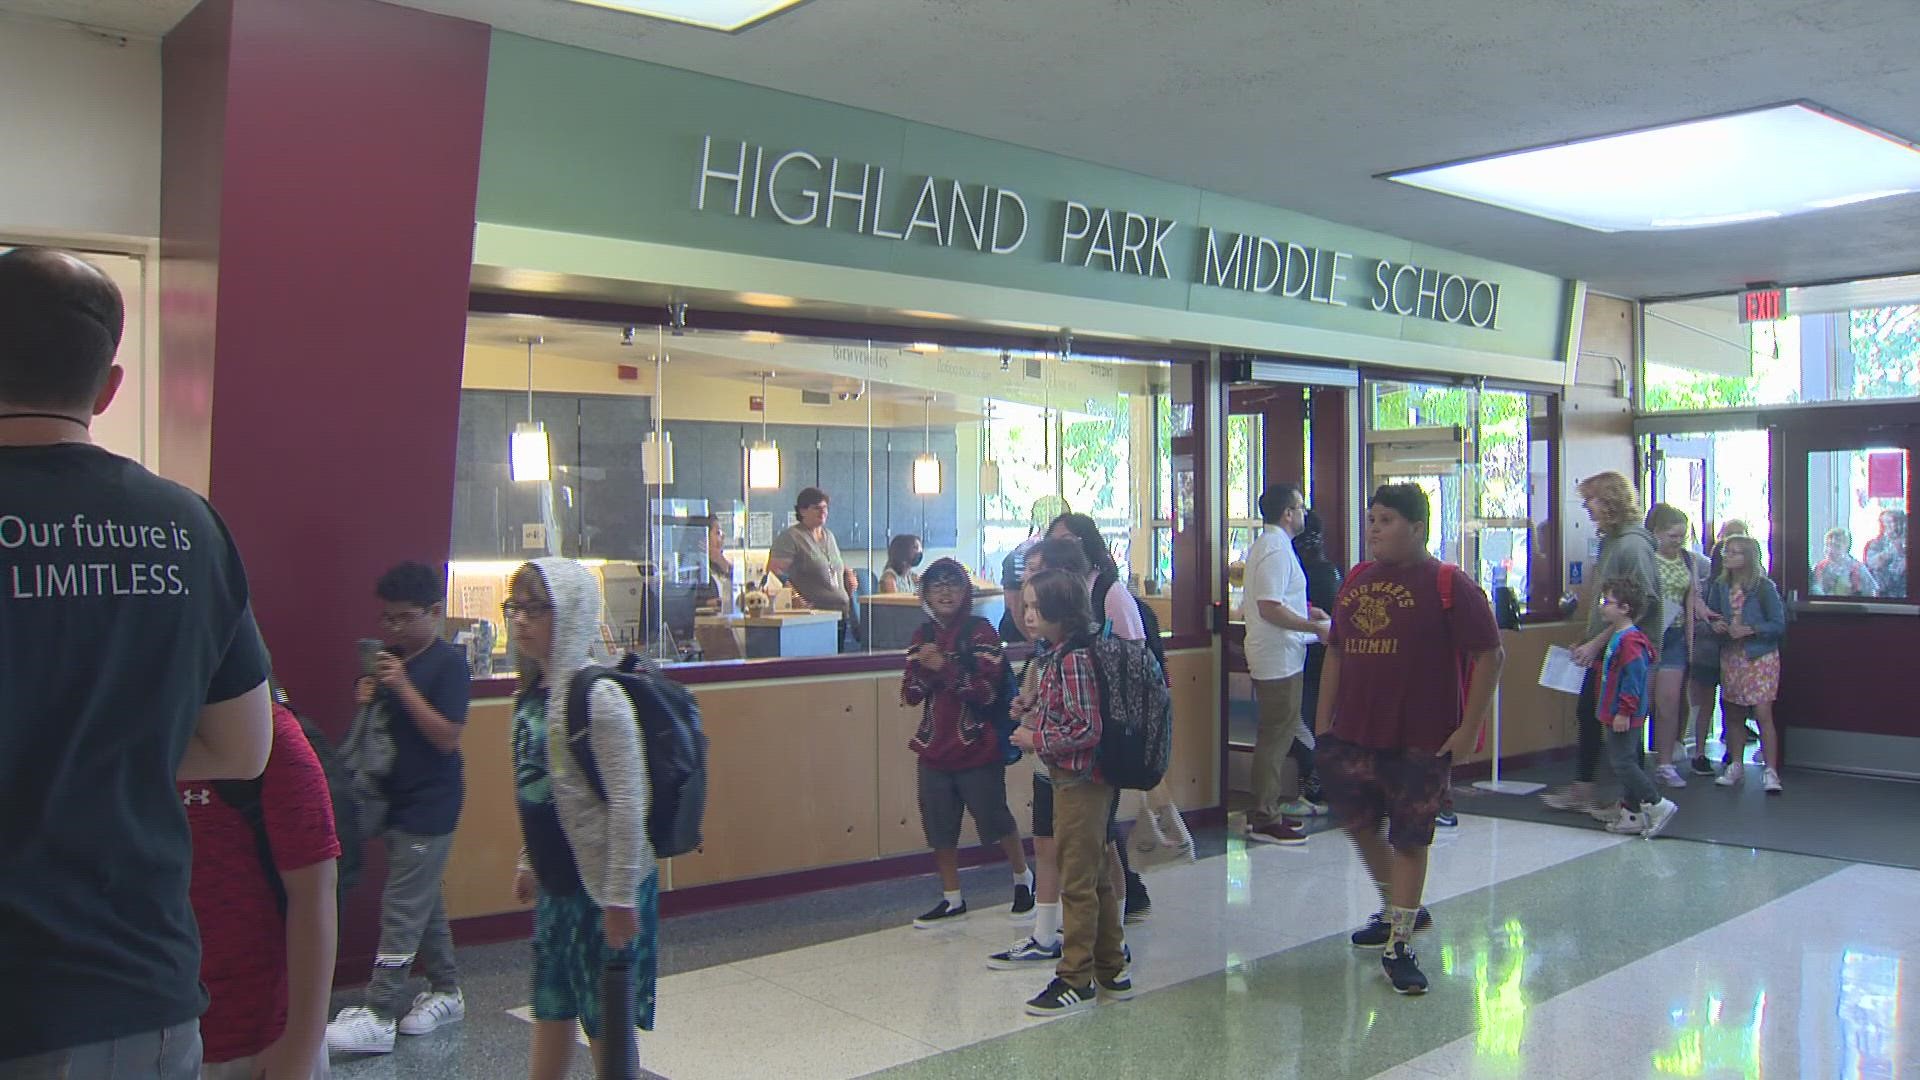 One school in Southwest Portland welcomed more than 2,700 students on Tuesday. School officials are hoping young students find their passion for school.